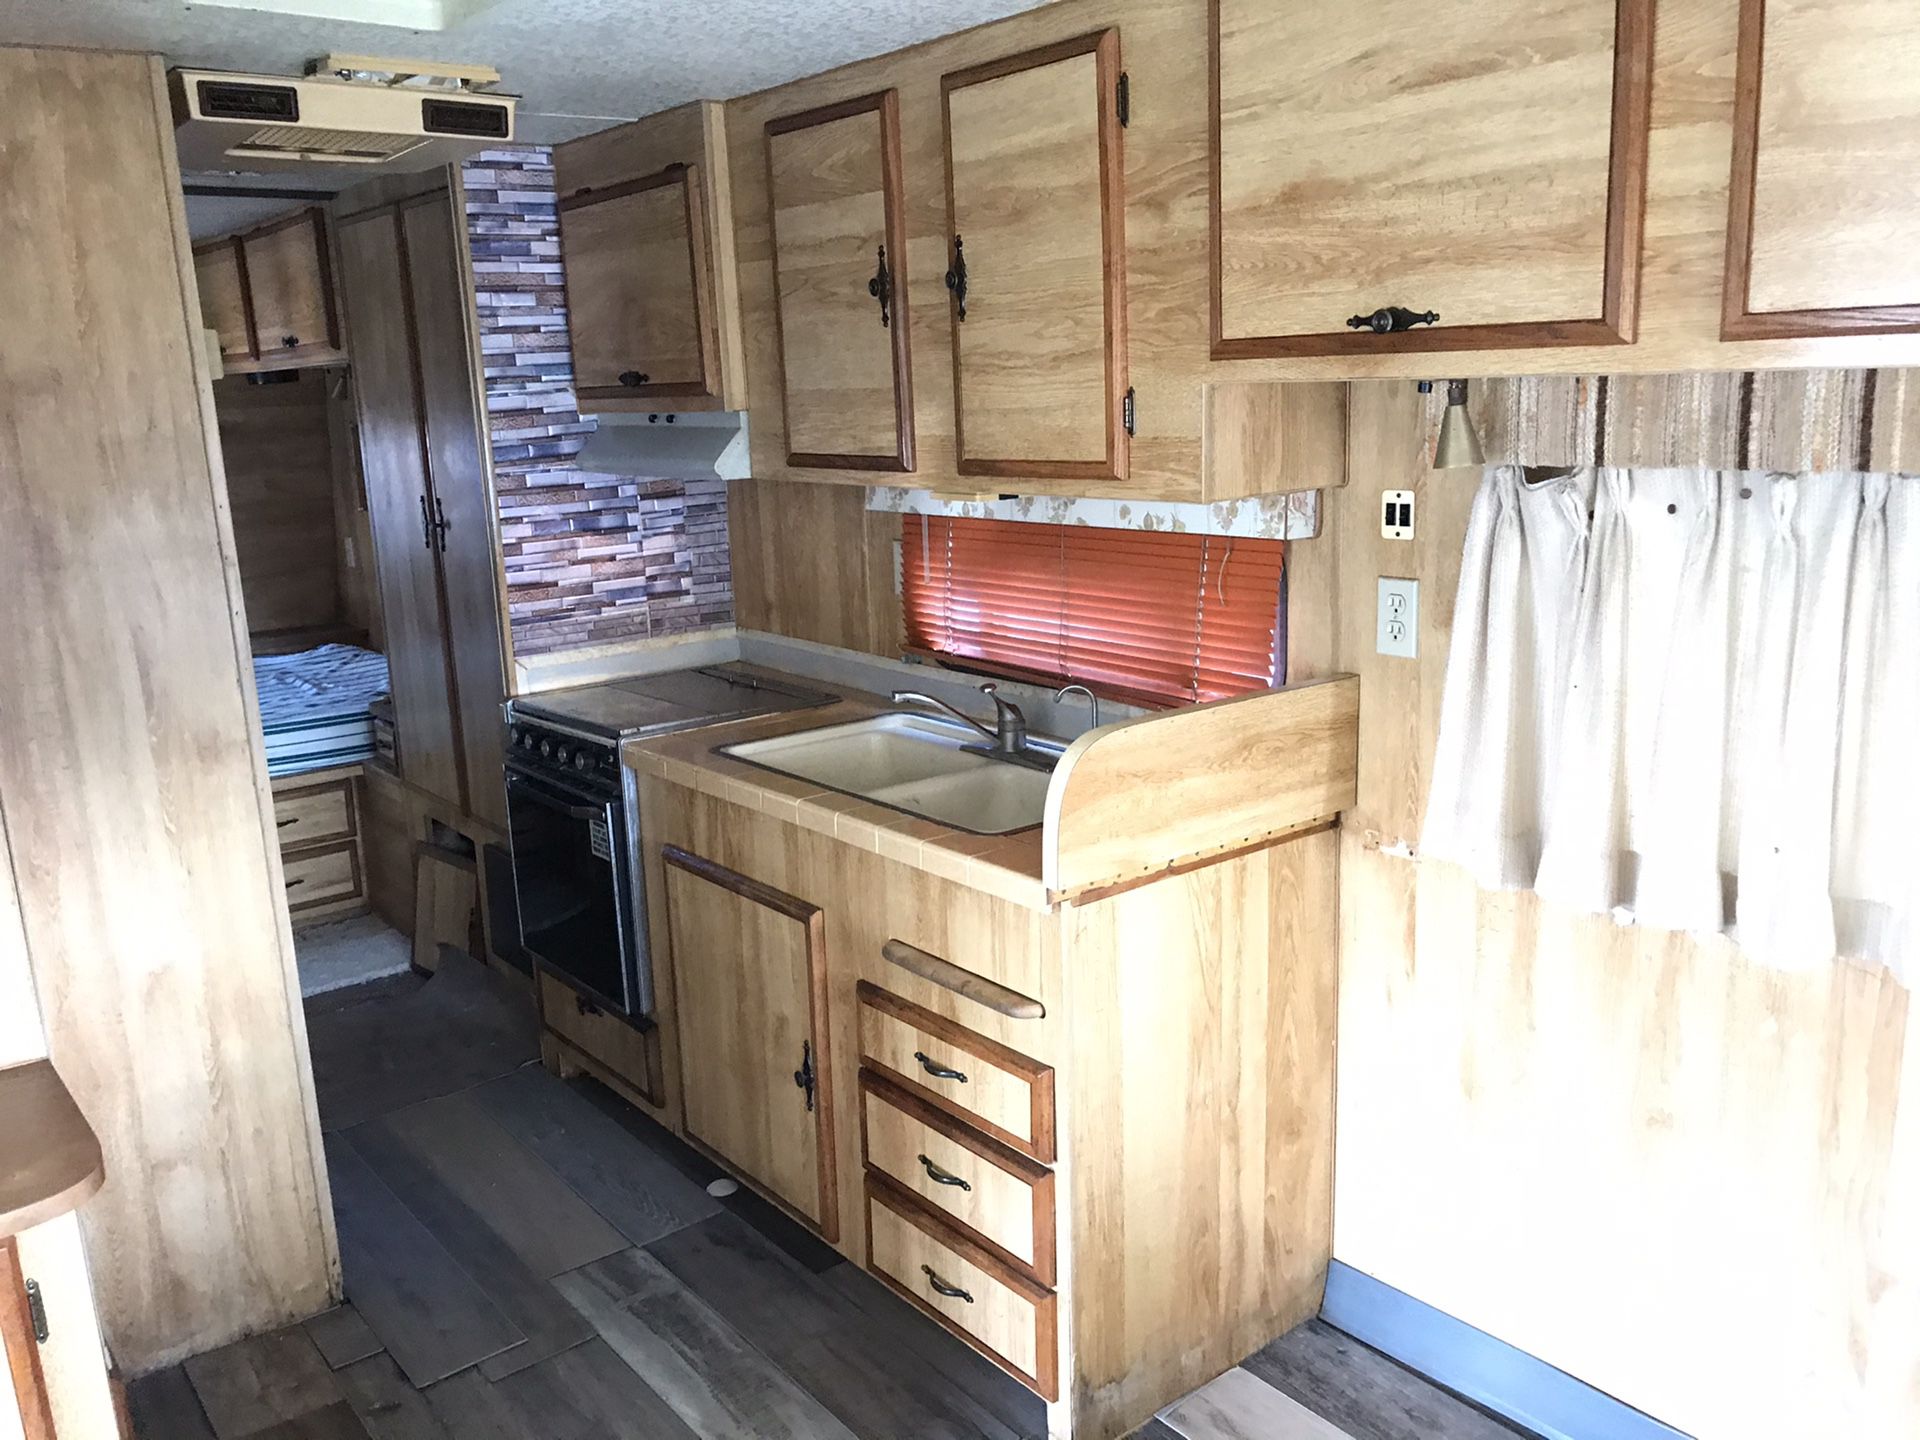 Fully Functional / Clean and Livable 1984 27 ft ALFA Travel Trailer. Dual entrance. New floor!. Remodeled!. Delivery ok!.😎🤙🏼